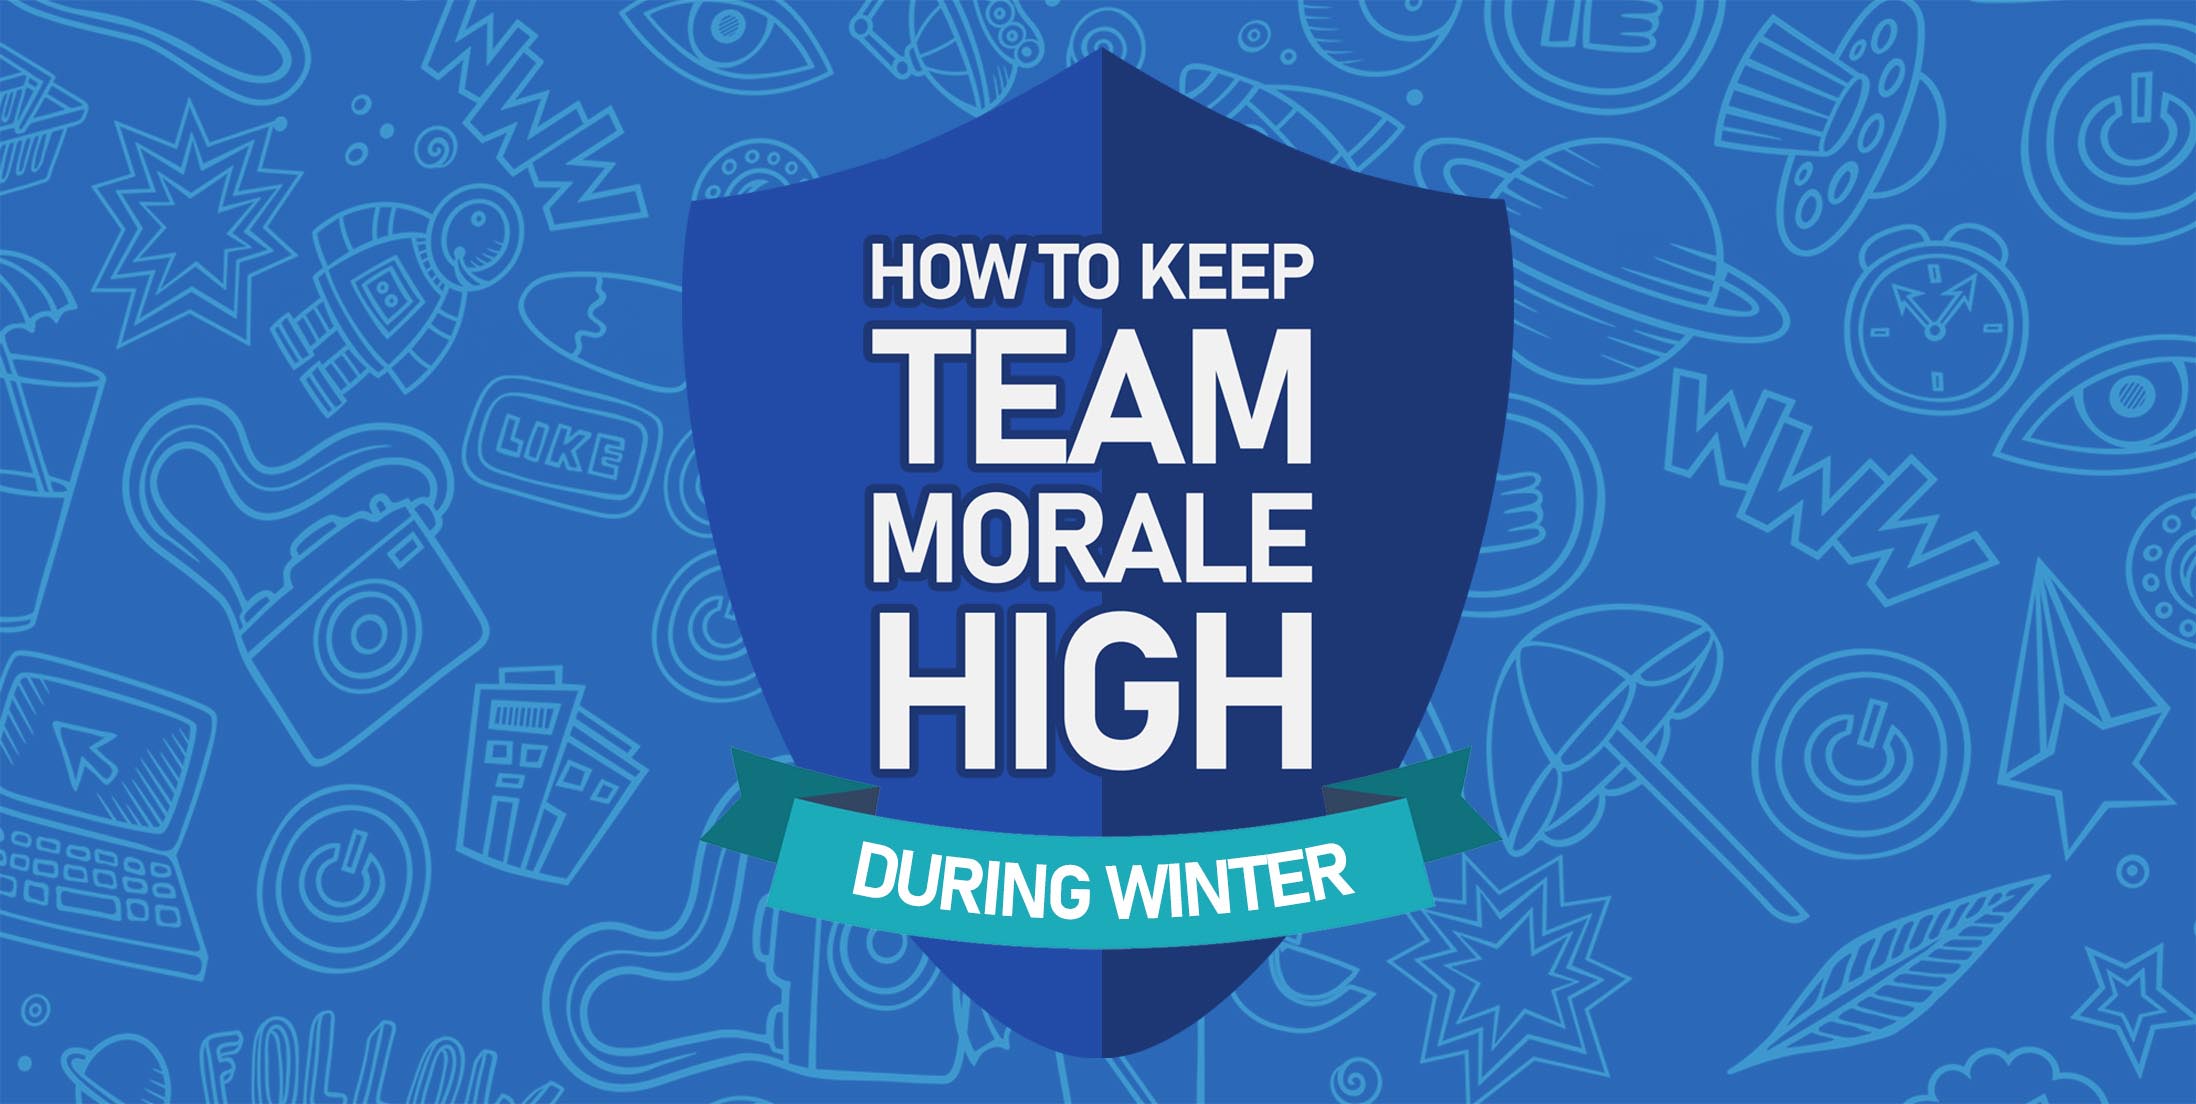 How to Keep Team Morale High During Winter